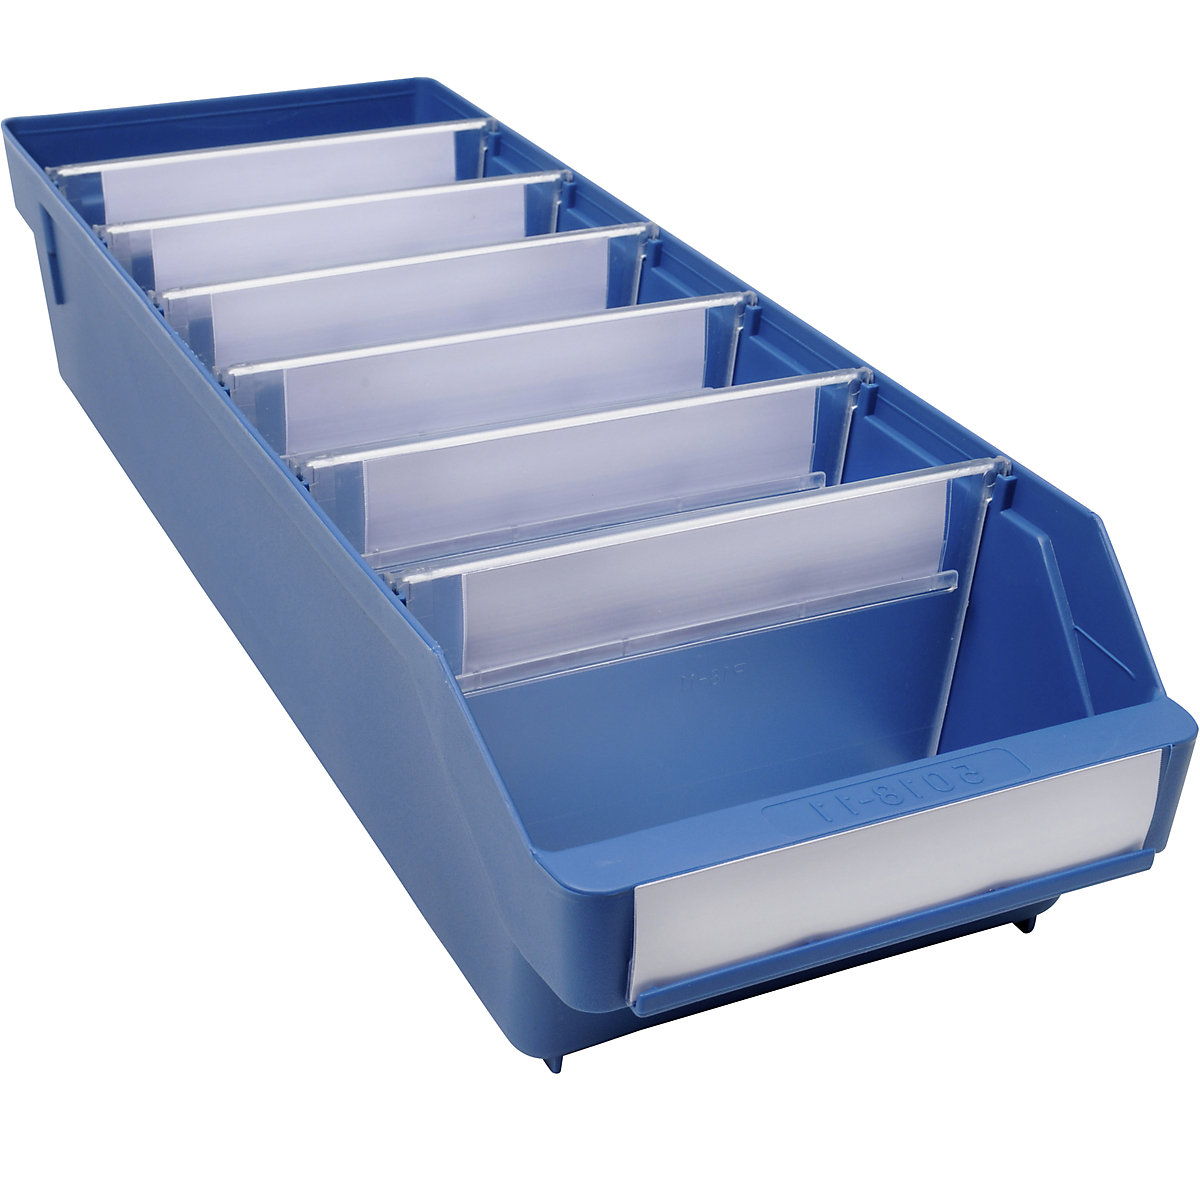 Shelf bin made of highly impact resistant polypropylene – STEMO, blue, LxWxH 500 x 180 x 110 mm, pack of 20-8